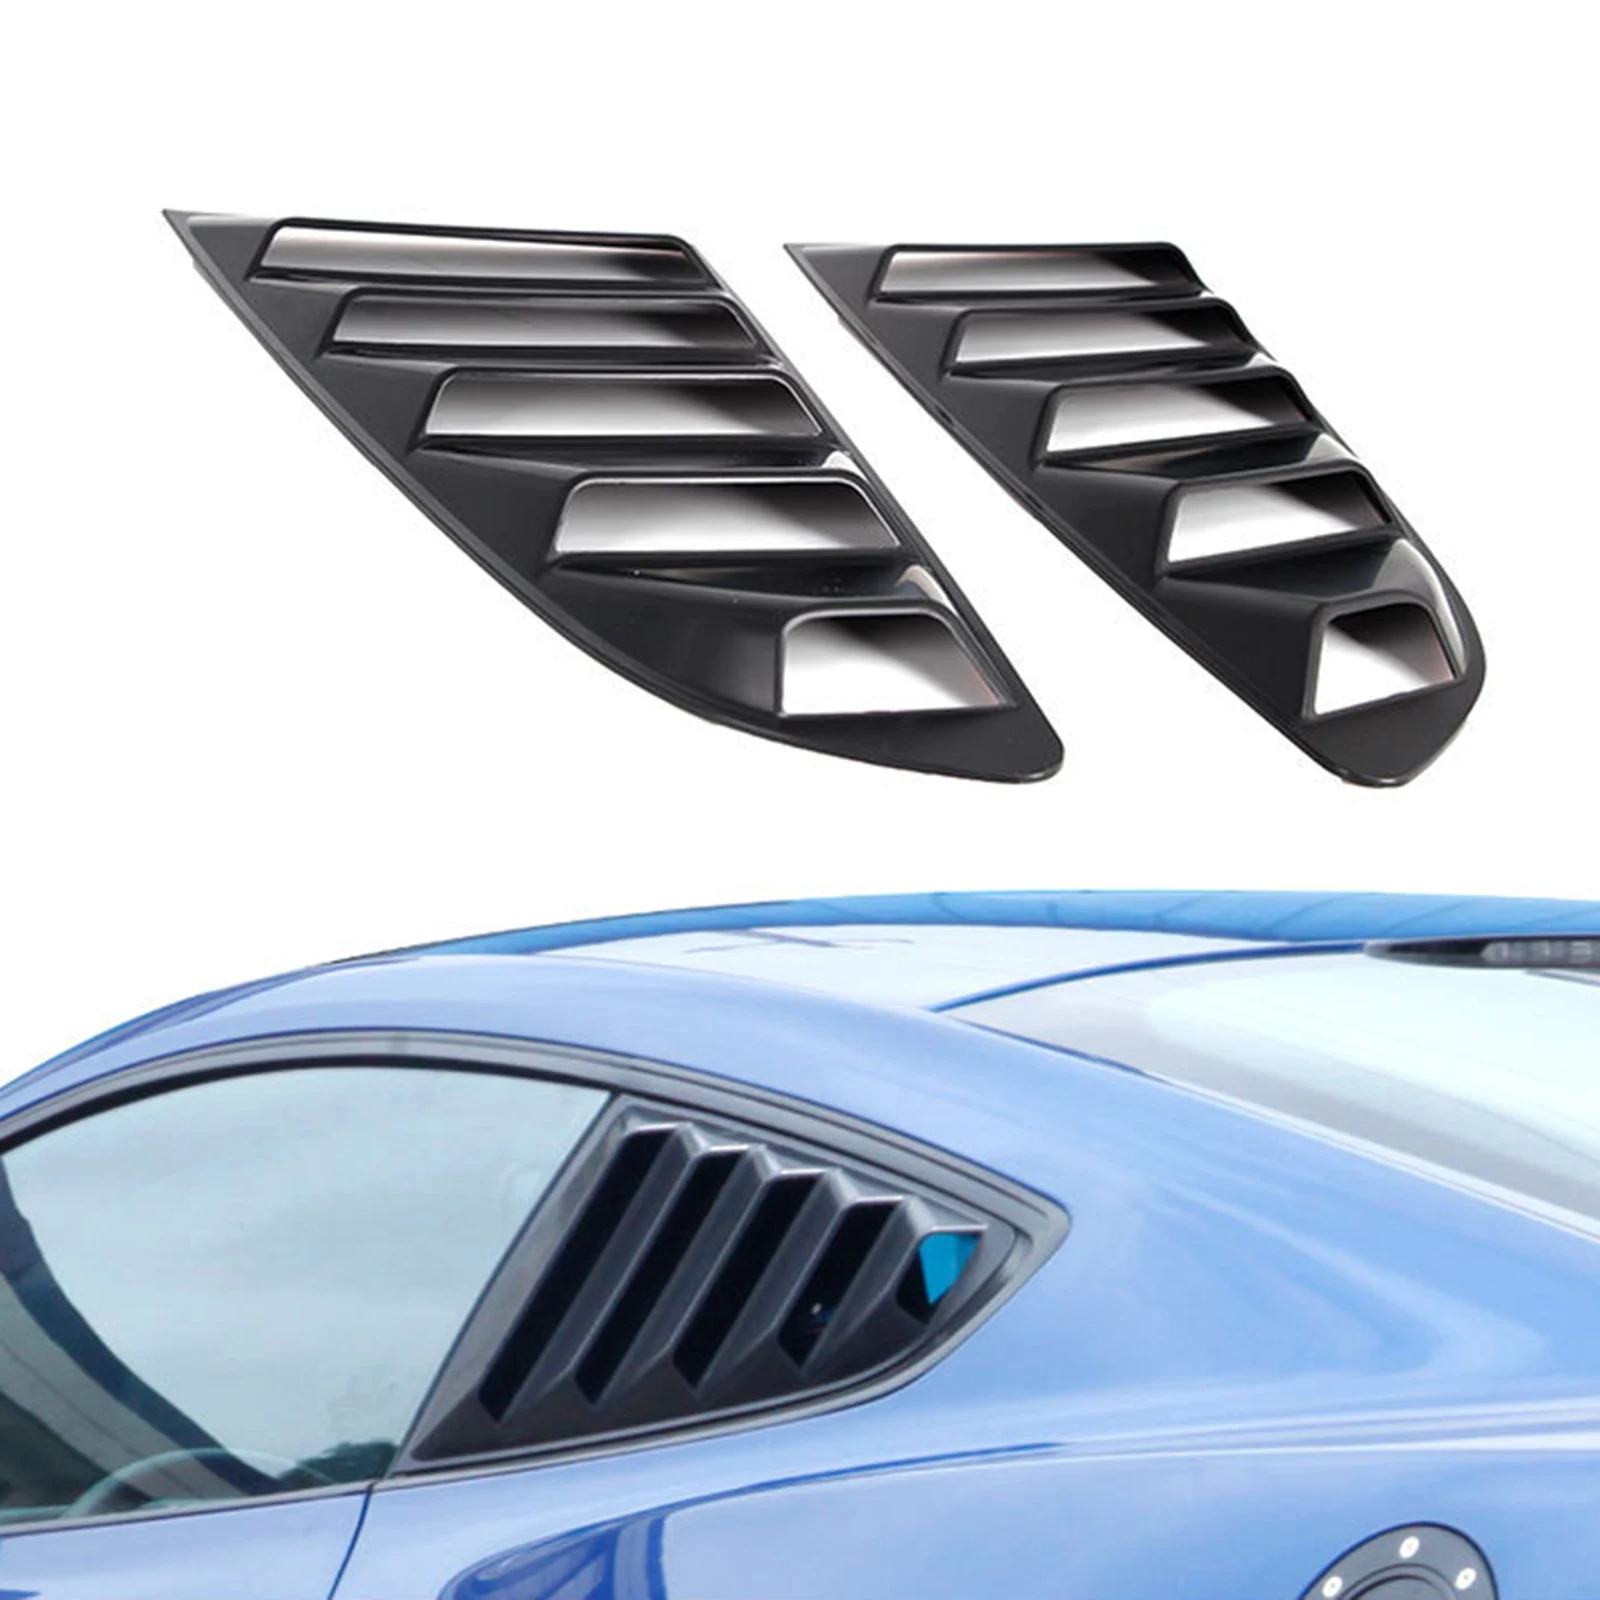 Sporthfish Matte Black ABS Rear Window Louvers and Quarter Side Window Scoop Louvers Fits for Ford Mustang 2015 2016 2017 2018 